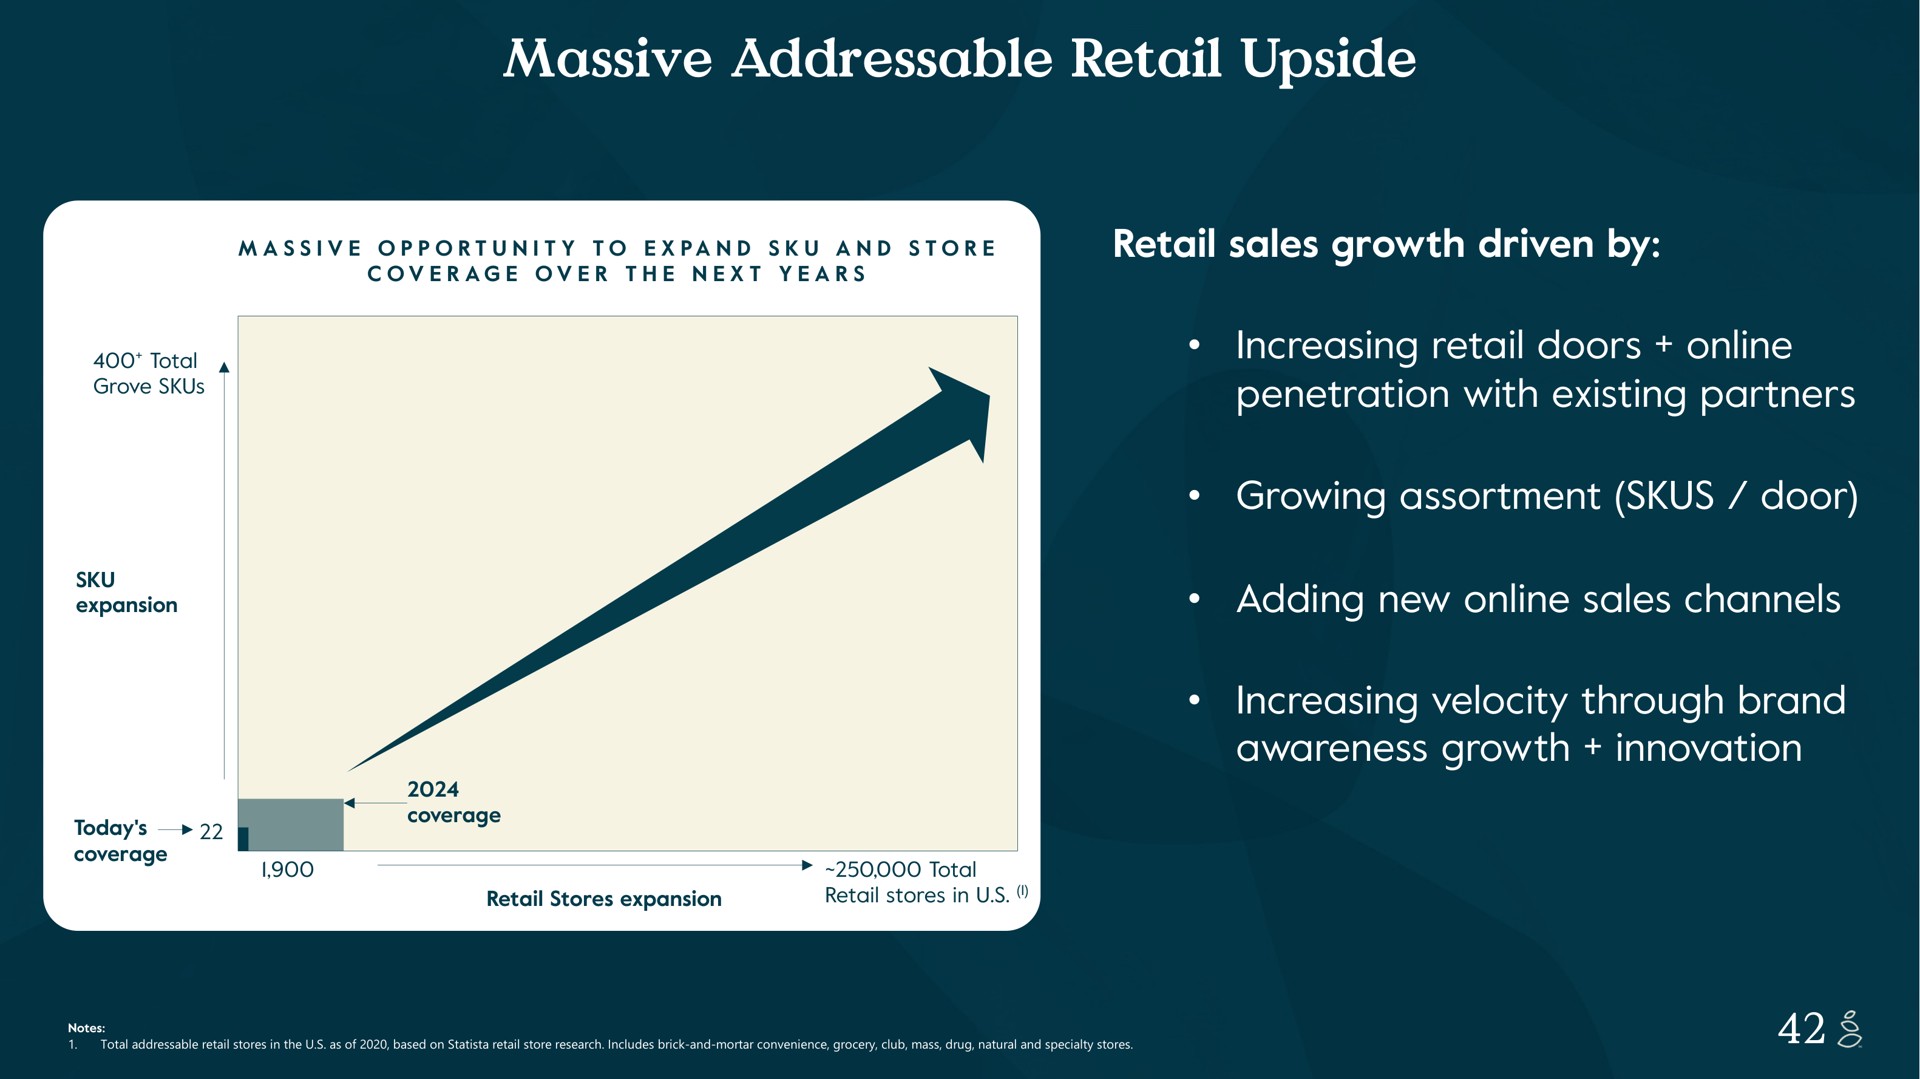 massive retail upside retail sales growth driven by increasing retail doors penetration with existing partners growing assortment door adding new sales channels increasing velocity through brand awareness growth innovation opportunity to expand and store coverage over the next years total grove expansion stores in total today mens stores expansion coverage a sole total stores in the as of based on store research includes brick and mortar convenience grocery club mass drug natural and specialty stores i i a | Grove